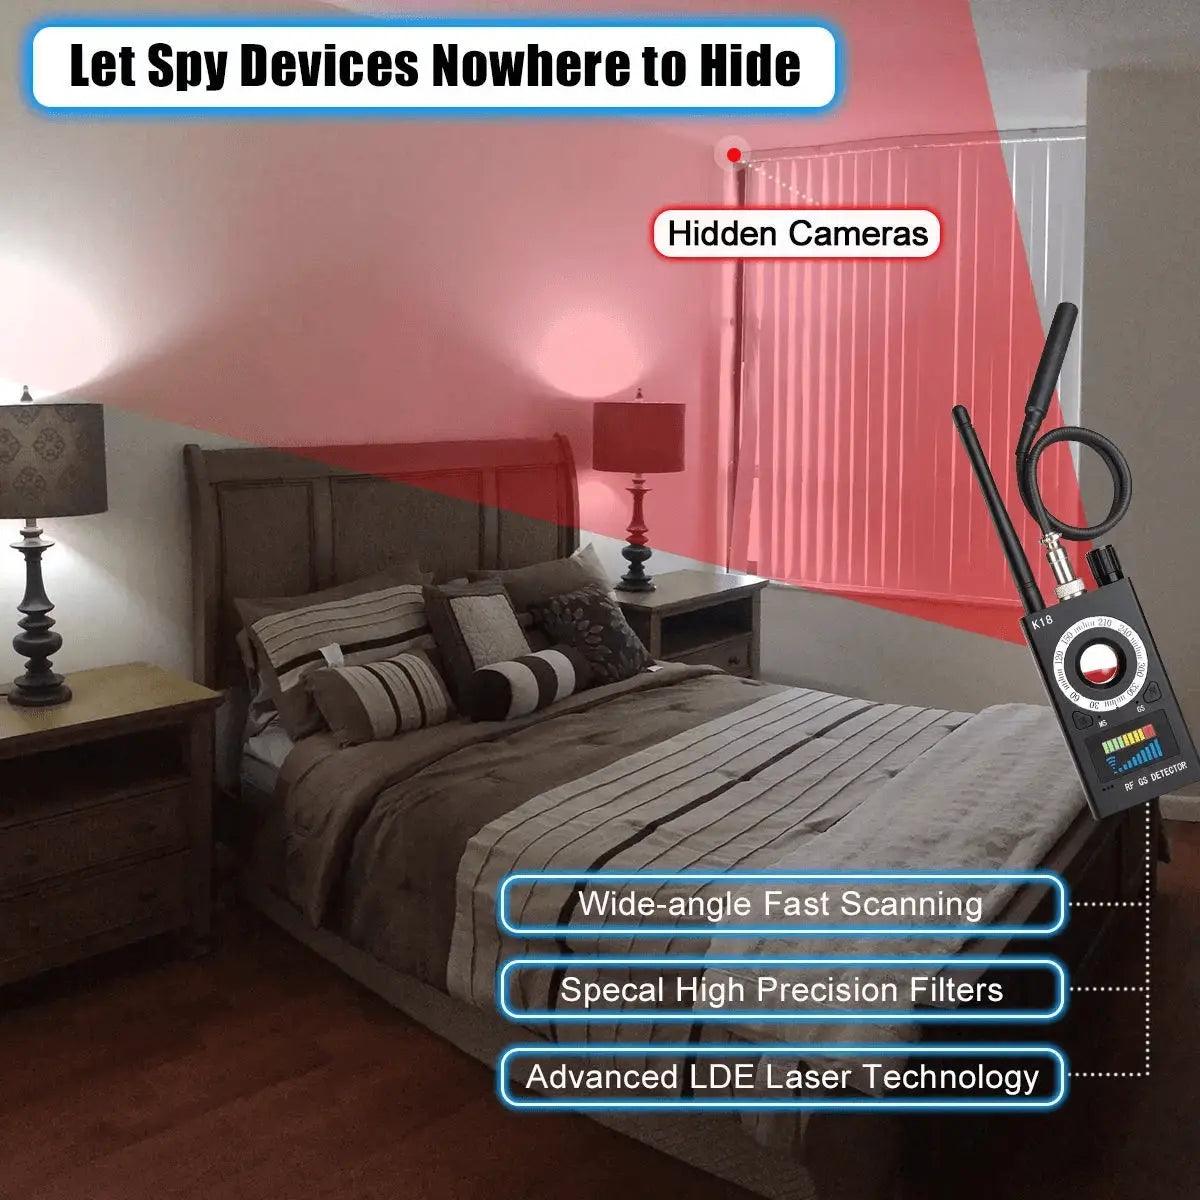 Multi-Purpose Anti-Spy Detector - Detects Hidden Devices, Cameras, Bugs, Listening Devices, RF Signals, and GPS Trackers - Swayfer Tech